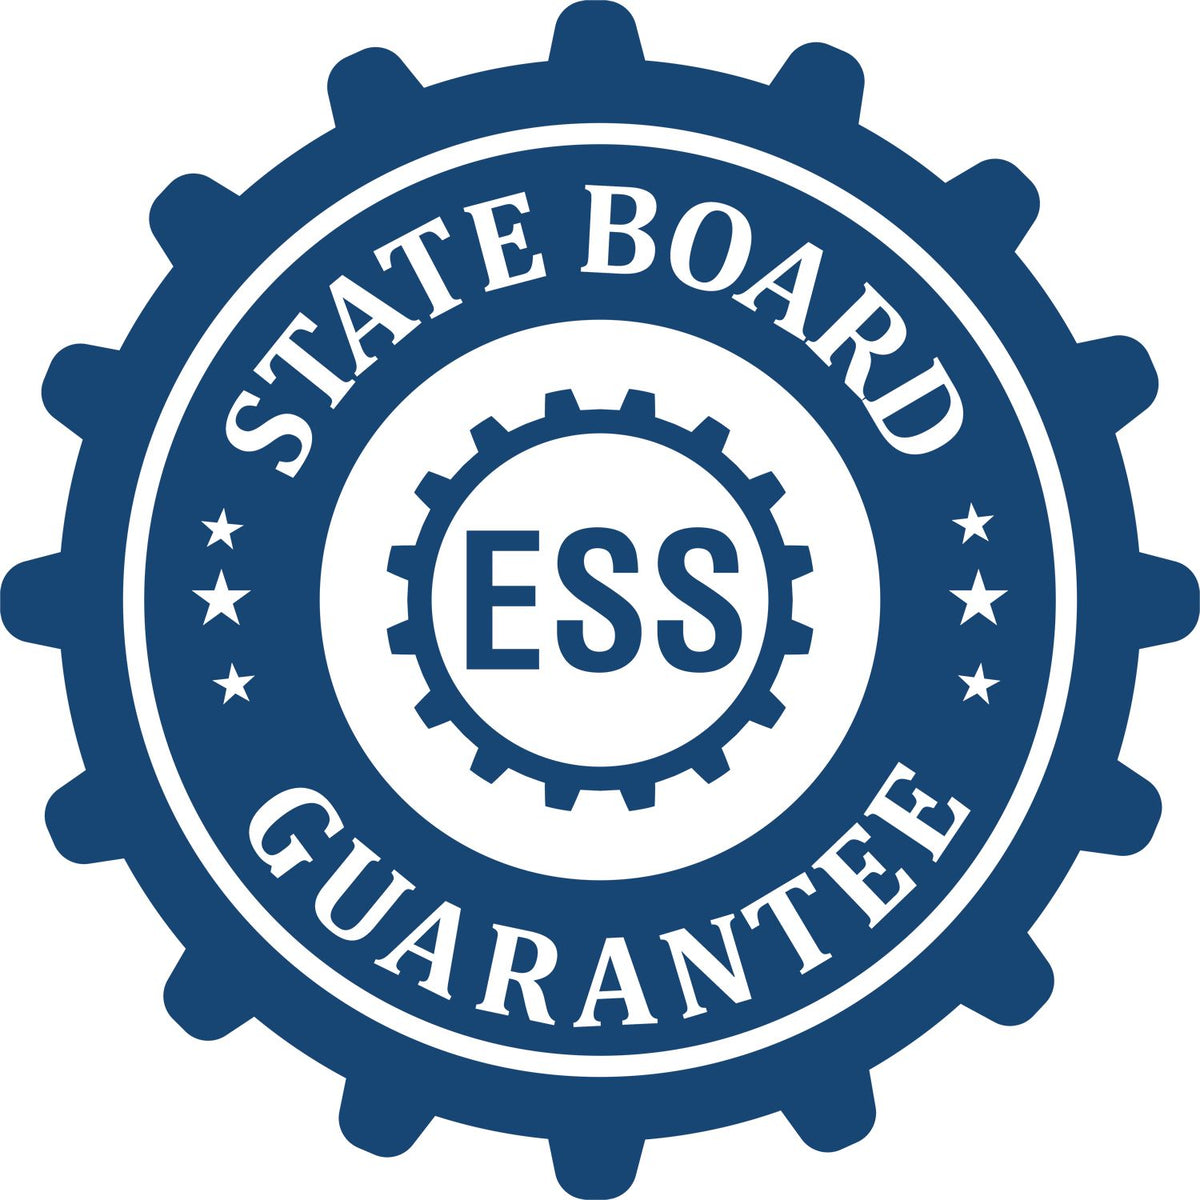 An emblem in a gear shape illustrating a state board guarantee for the Heavy-Duty Ohio Rectangular Notary Stamp product.